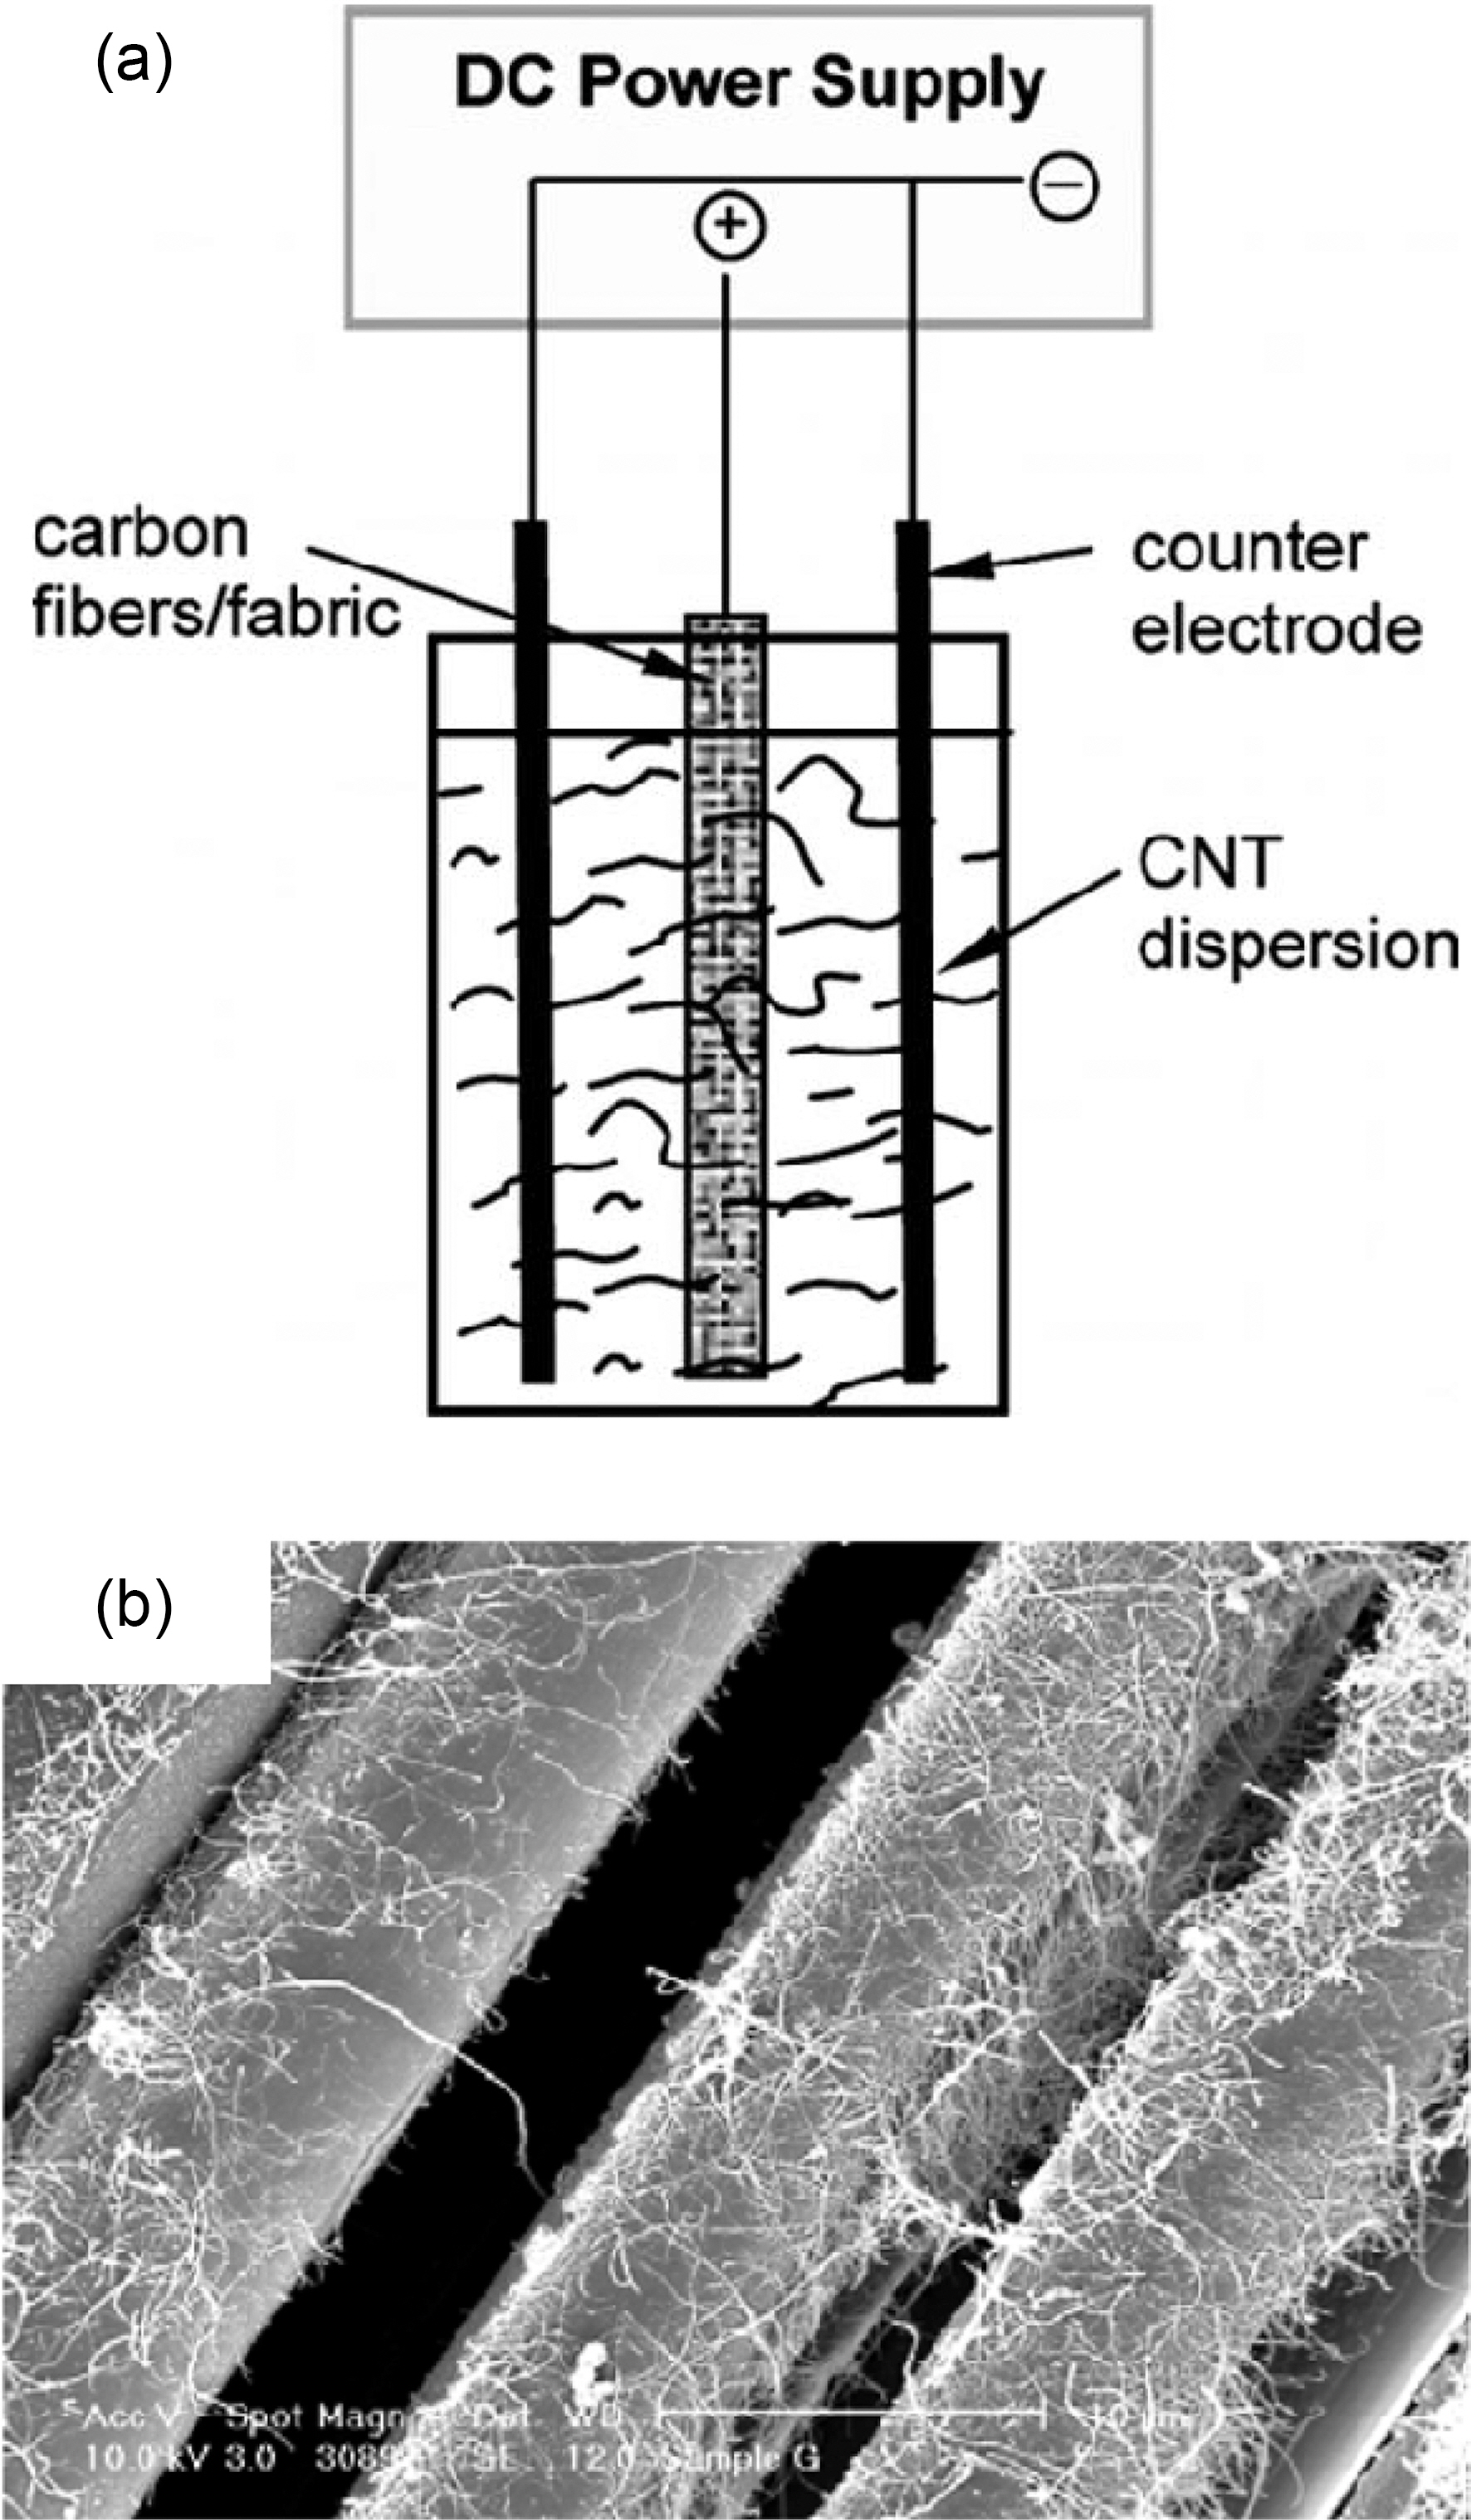 (a) Electrophoresis process for deposition of CNT on CNF and (b) CNF with MWCNT deposited by electrophoresis [55].